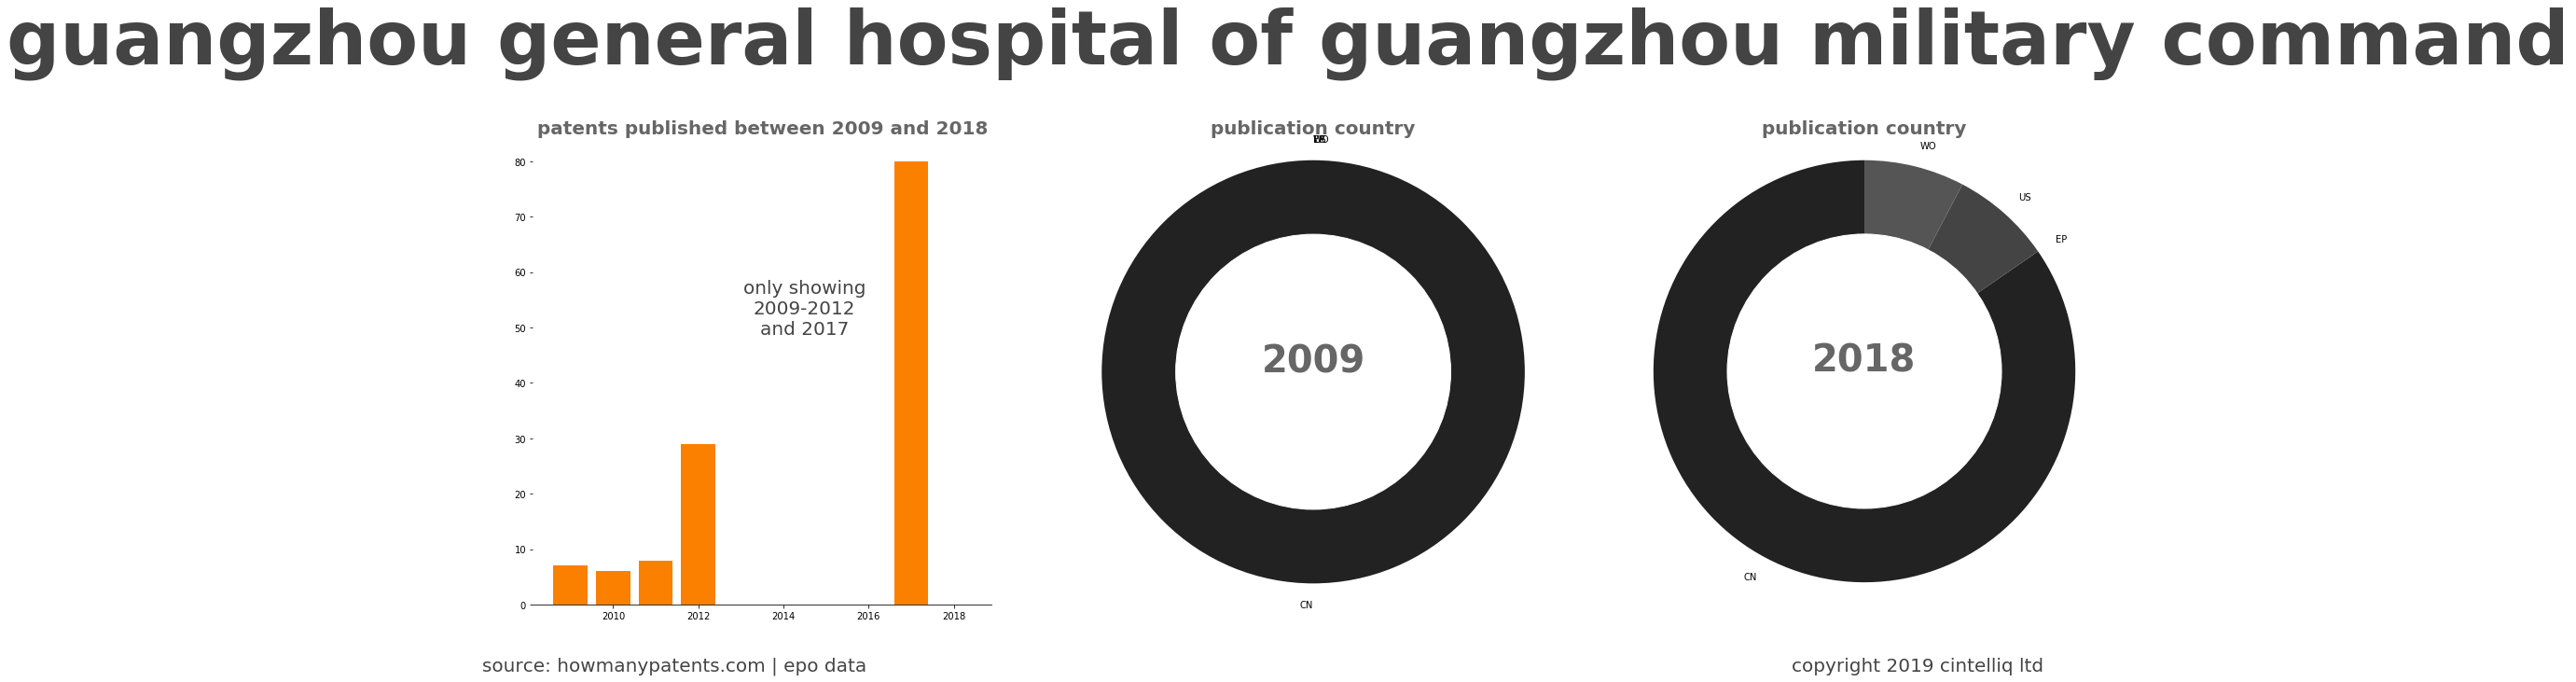 summary of patents for Guangzhou General Hospital Of Guangzhou Military Command